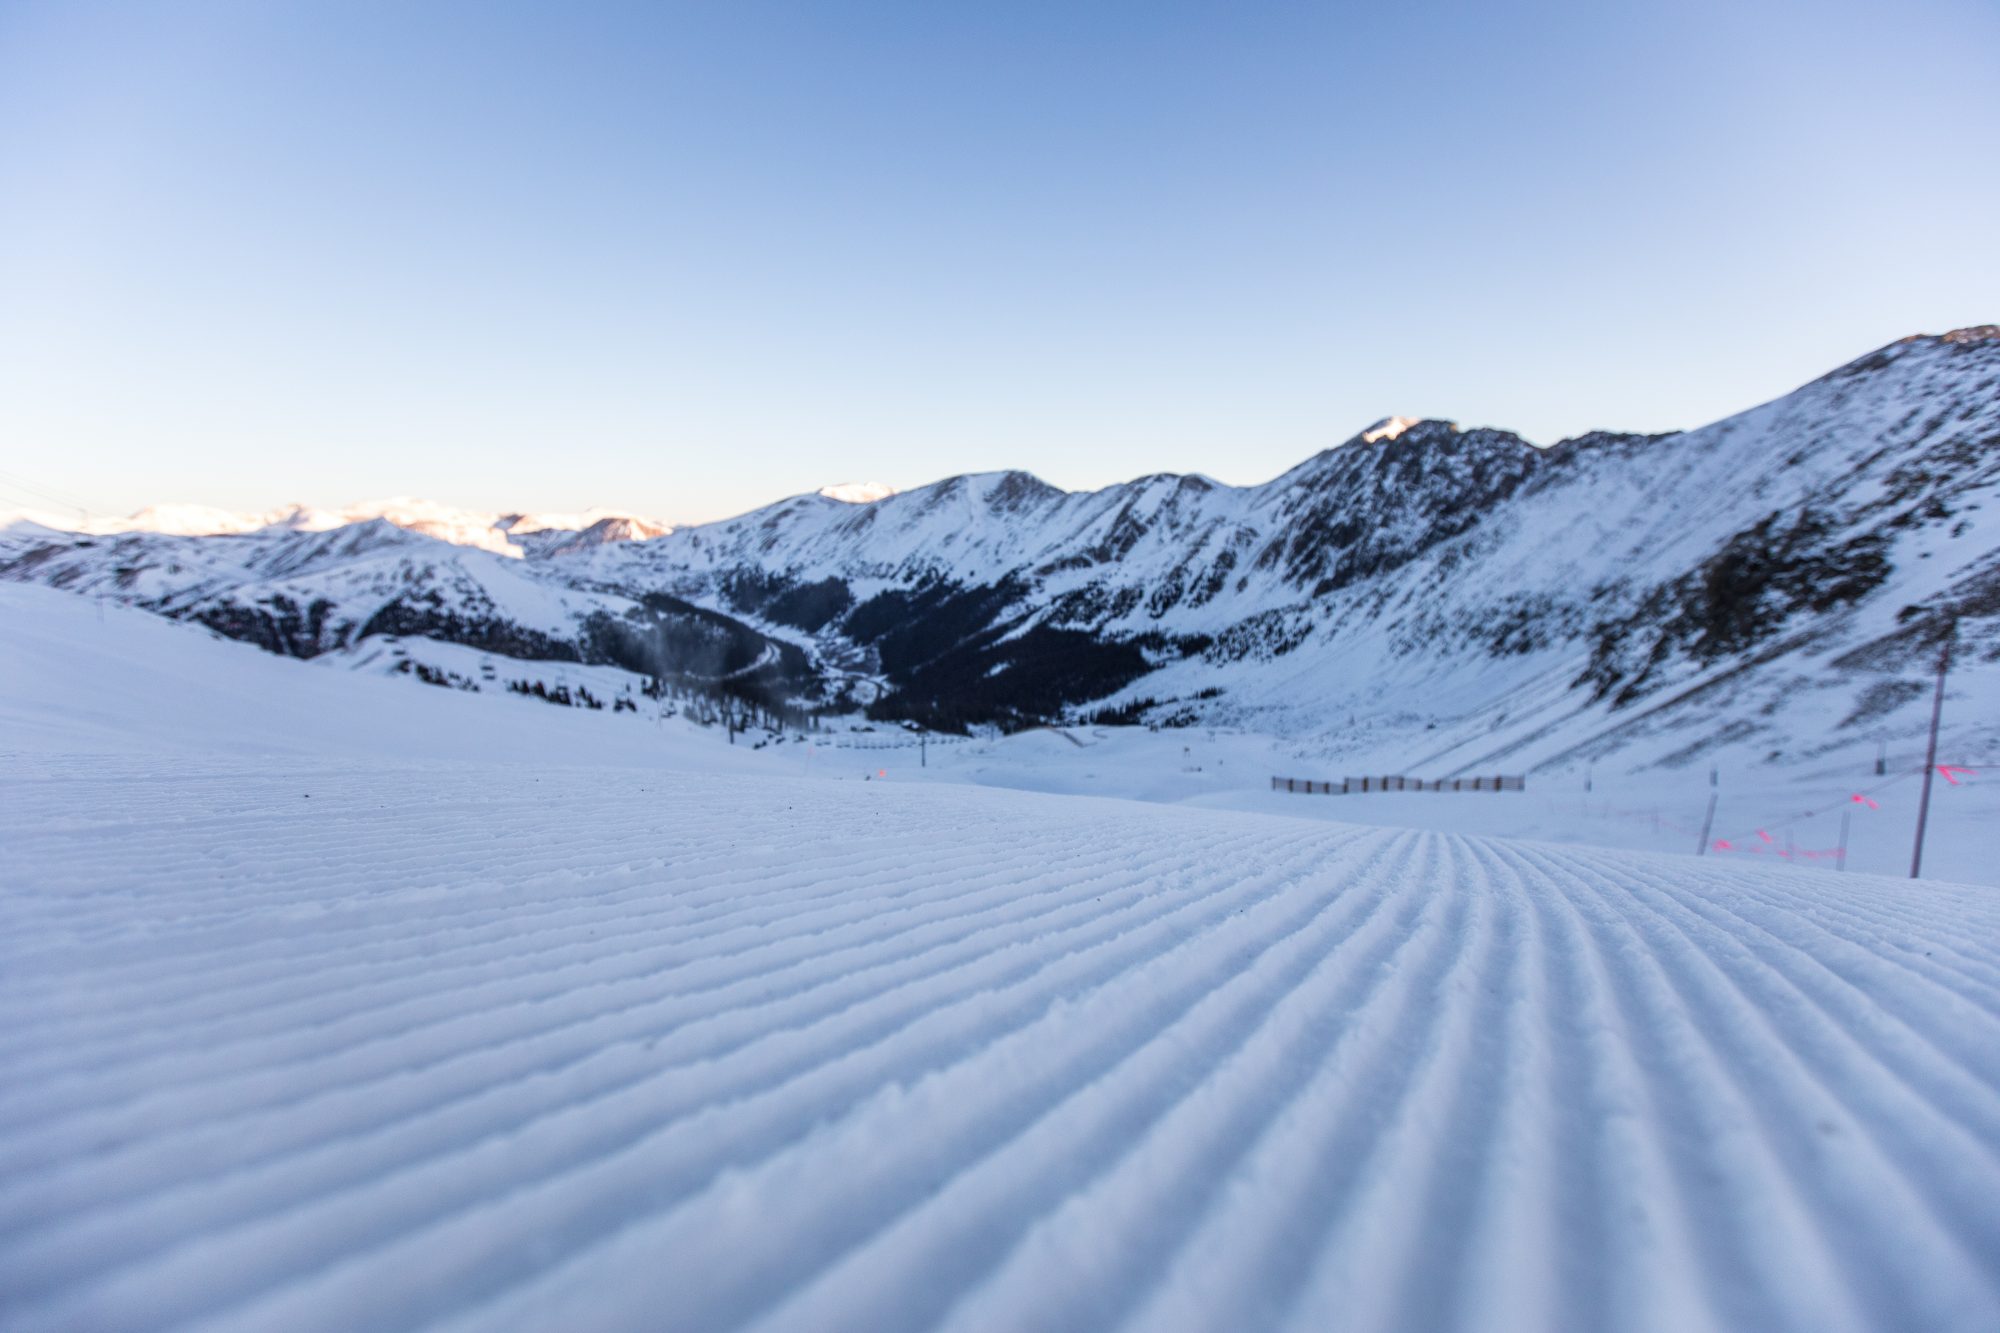 A groomed run - Grizzly Road - Photo: Dave Camara. Arapahoe Basin. Arapahoe Basin is now part of the IKON Pass.